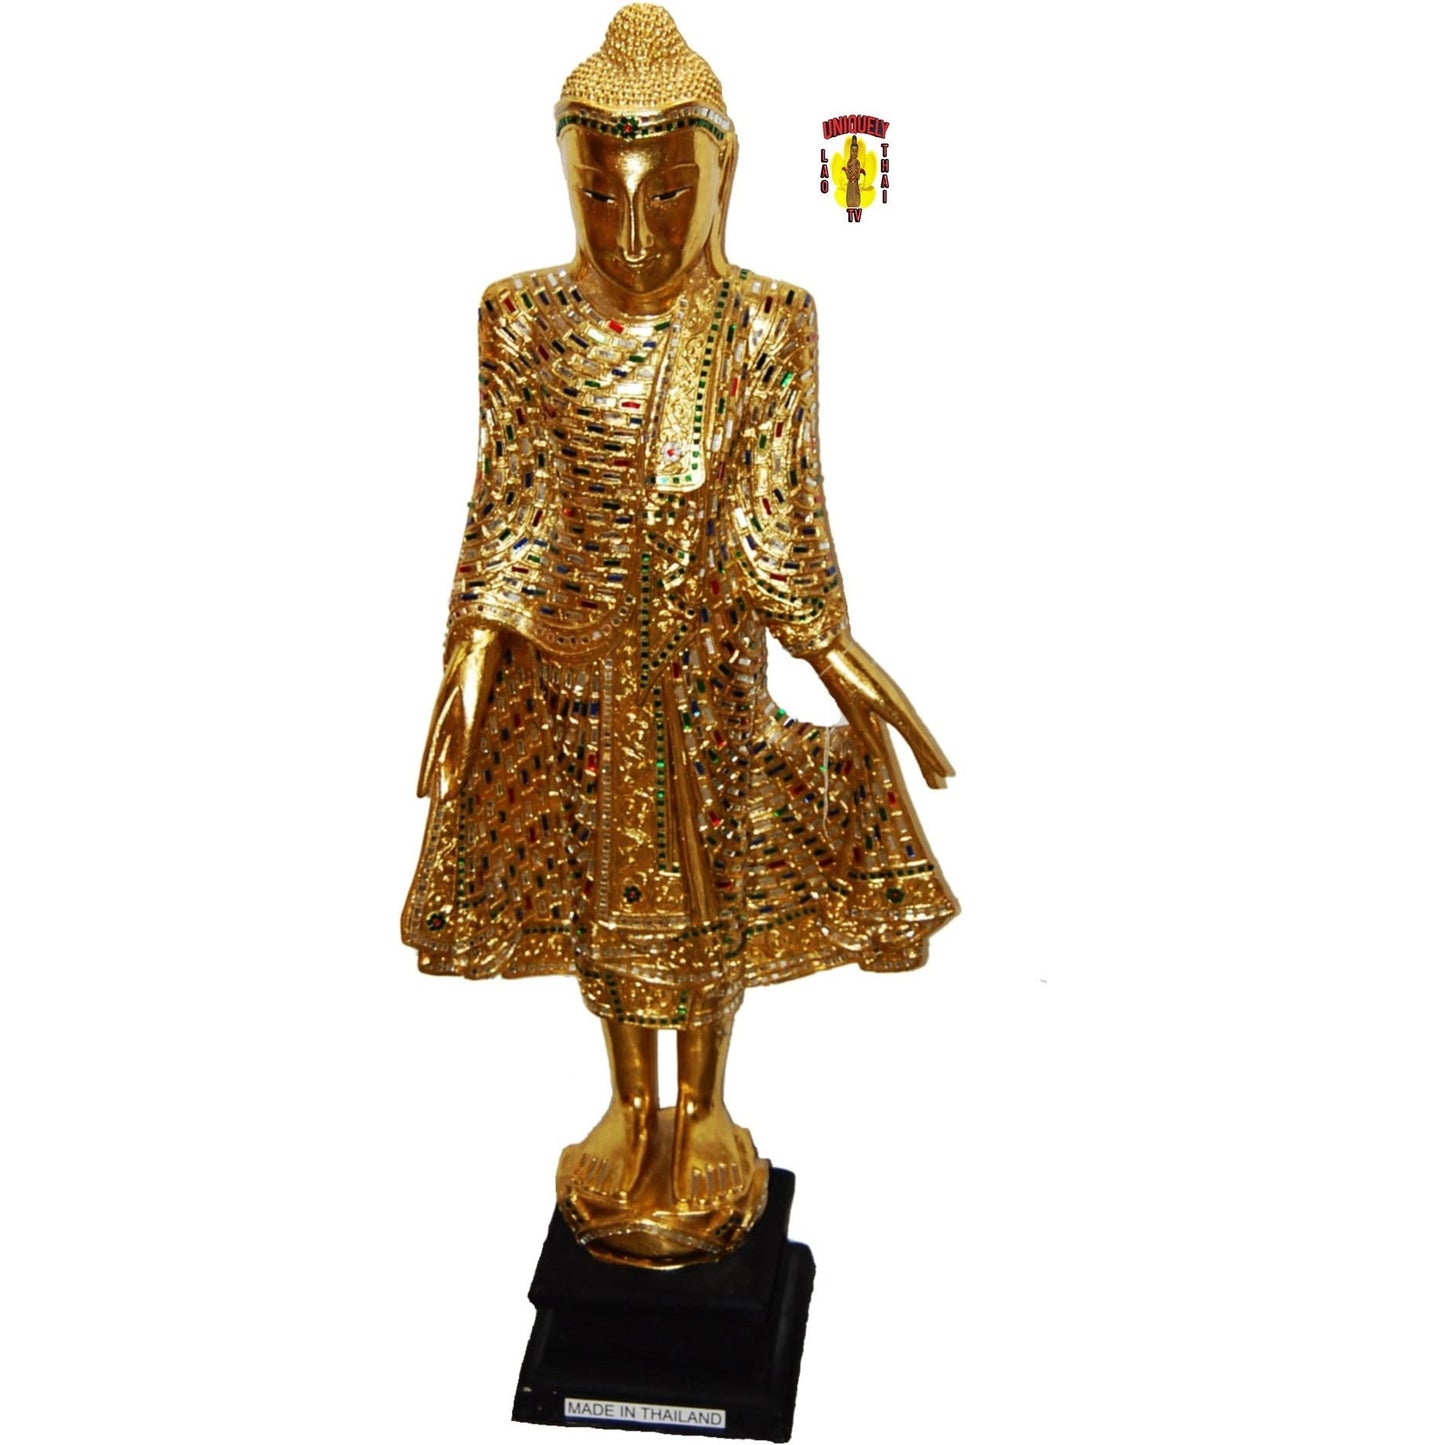 Standing Buddha Statue Gold Leaf 46 Inch Tall